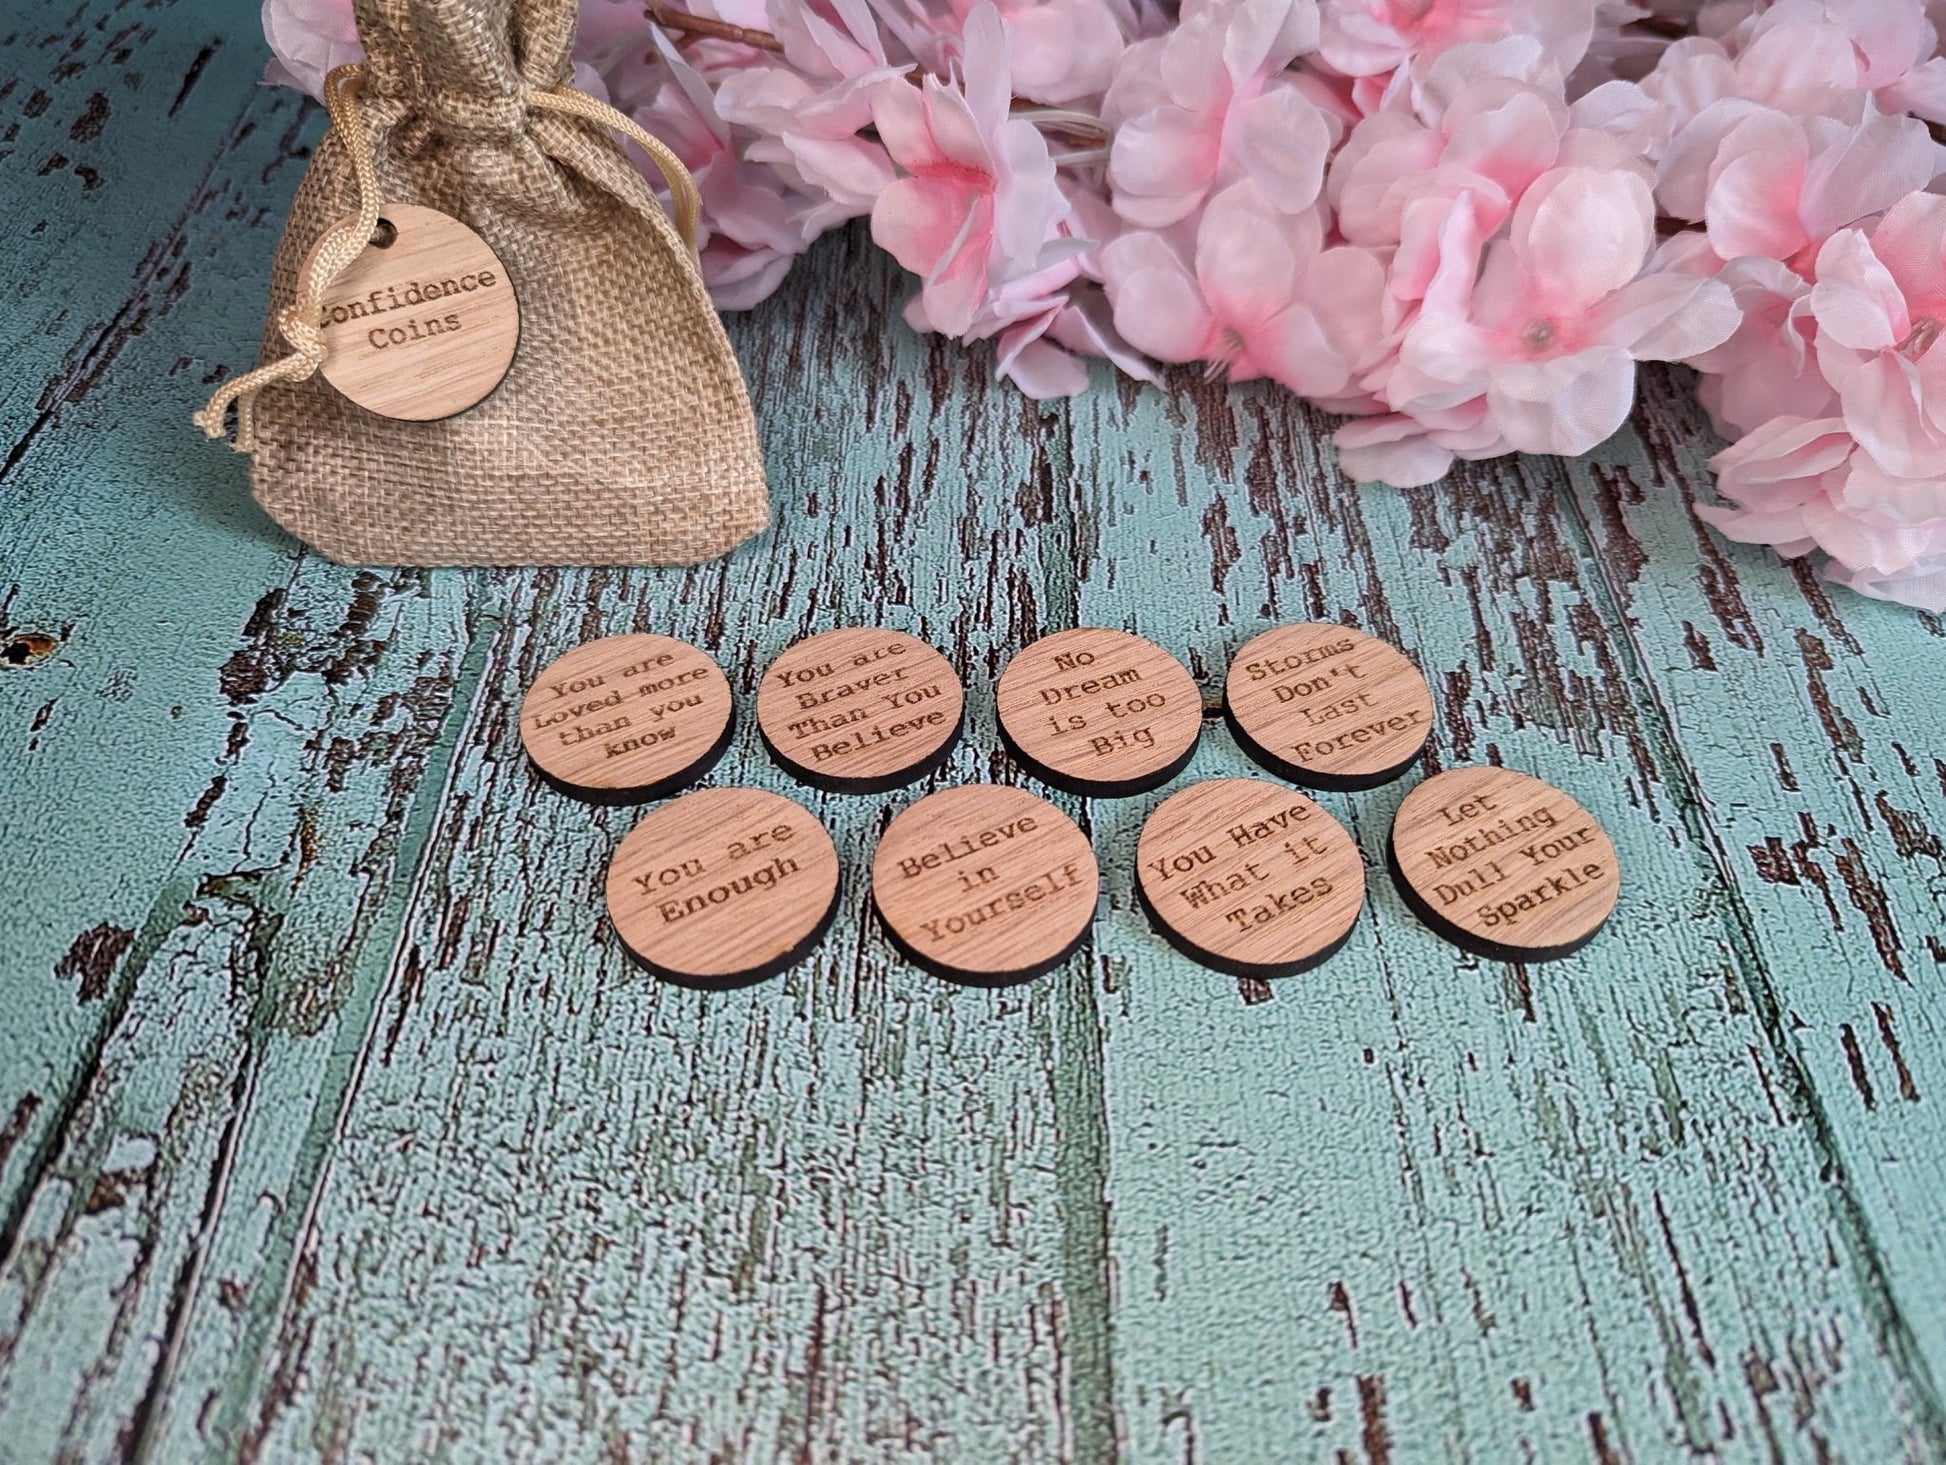 Personalised Wooden Hug Tokens - Oak Kindness Gifts - Gift for Friends - Wooden Tokens - Custom Engraved - Confidence Coins - CherryGroveCraft